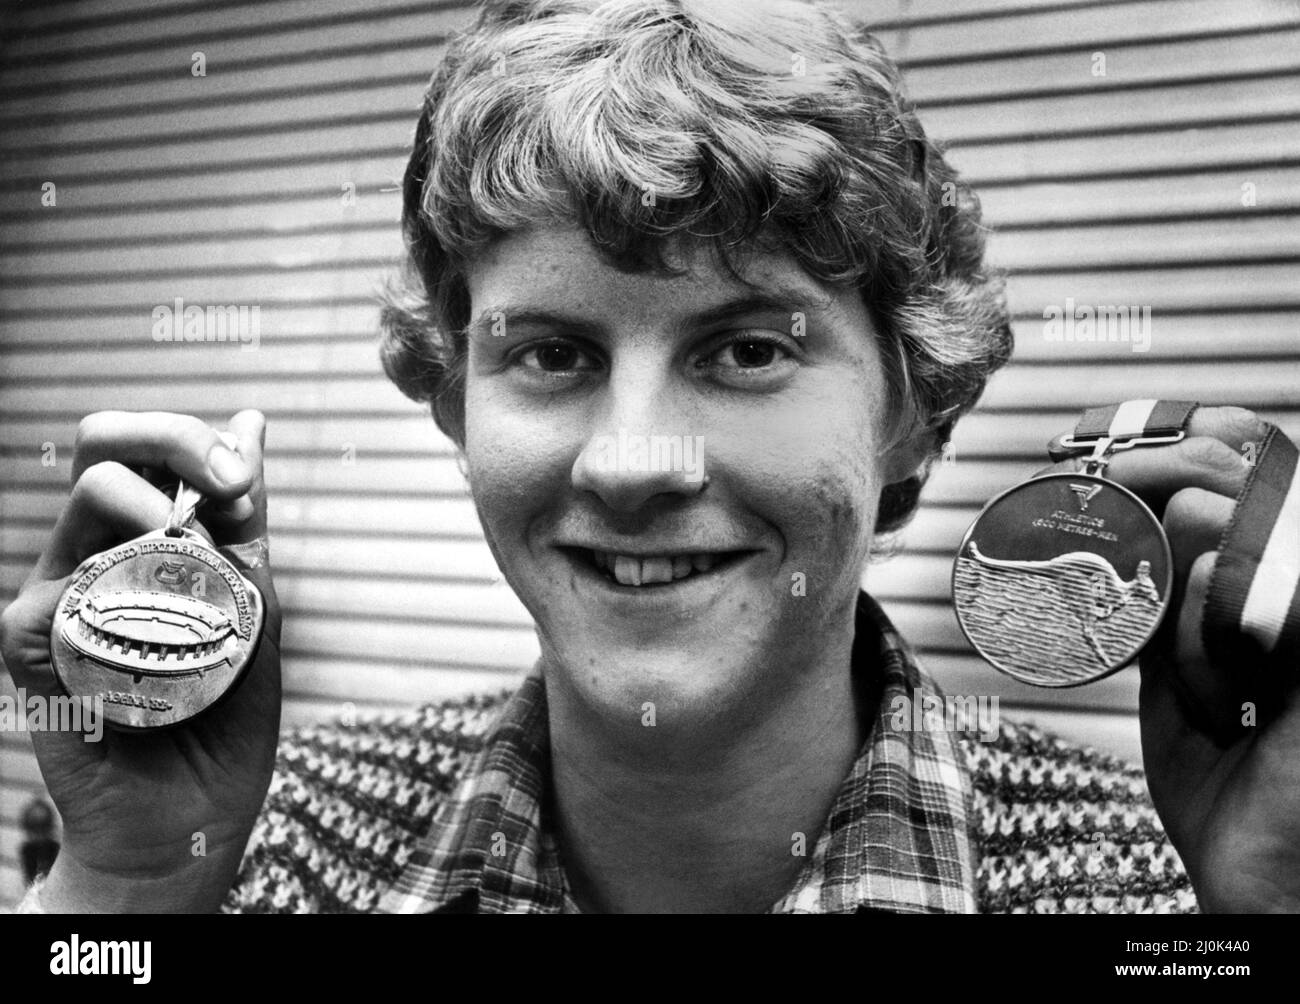 Athlete Steve Cram  Steve Cram show off his gold medals won in 1500 metres races at the European Athletics Championships at the Olympic Stadium in Athens, Greece and the  Commonwealth Games in Brisbane, Queensland, Australia 25 October 1982 Stock Photo